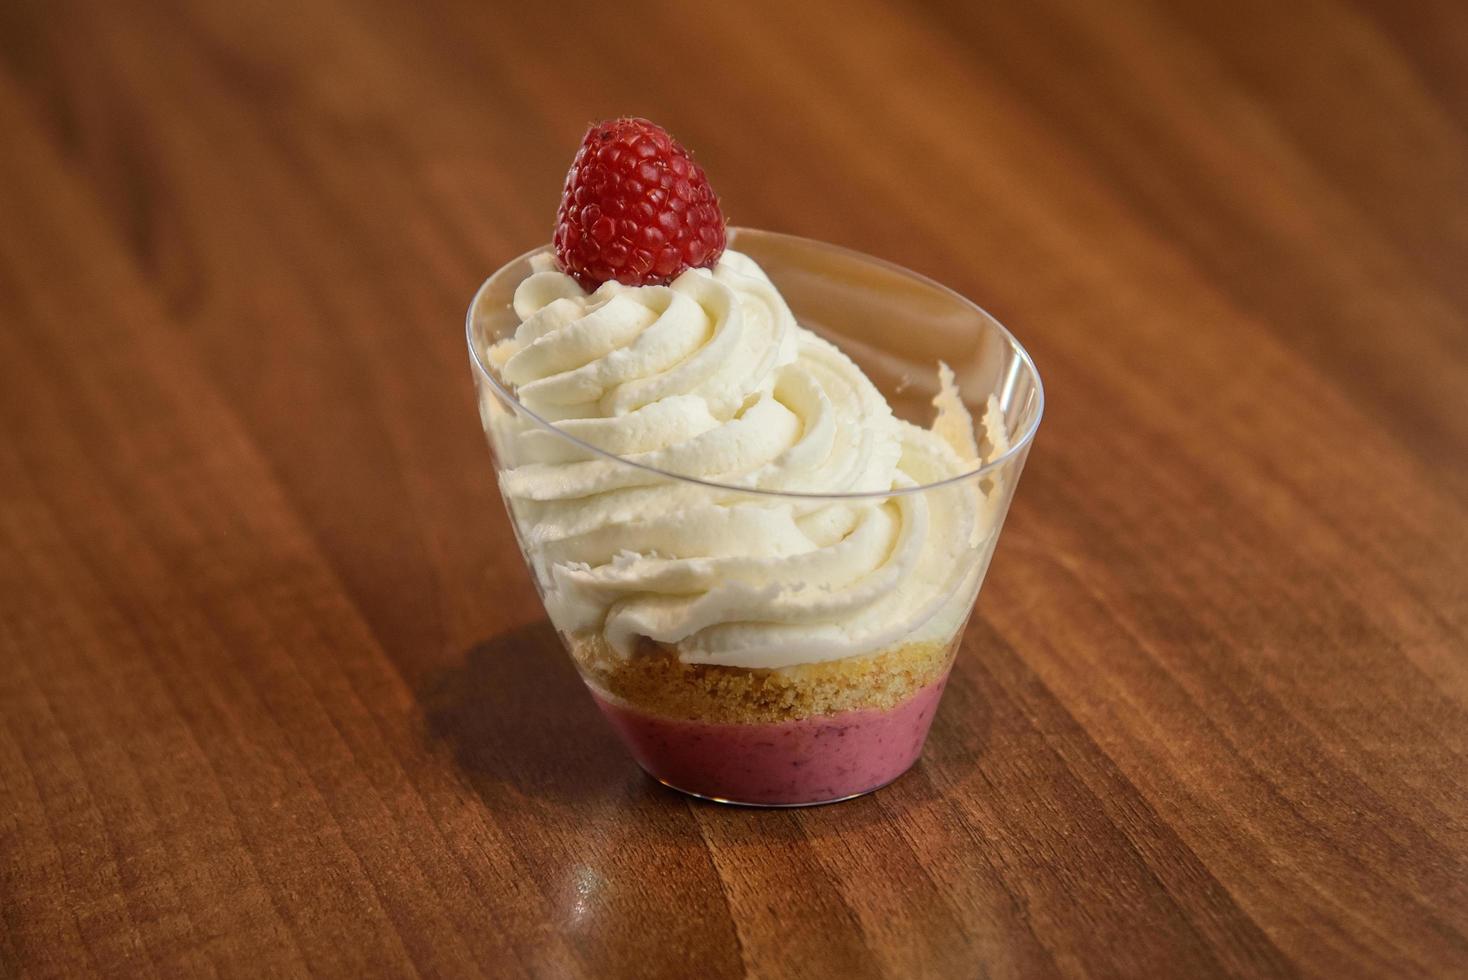 Raspberry dessert with whipped cream in a glass photo